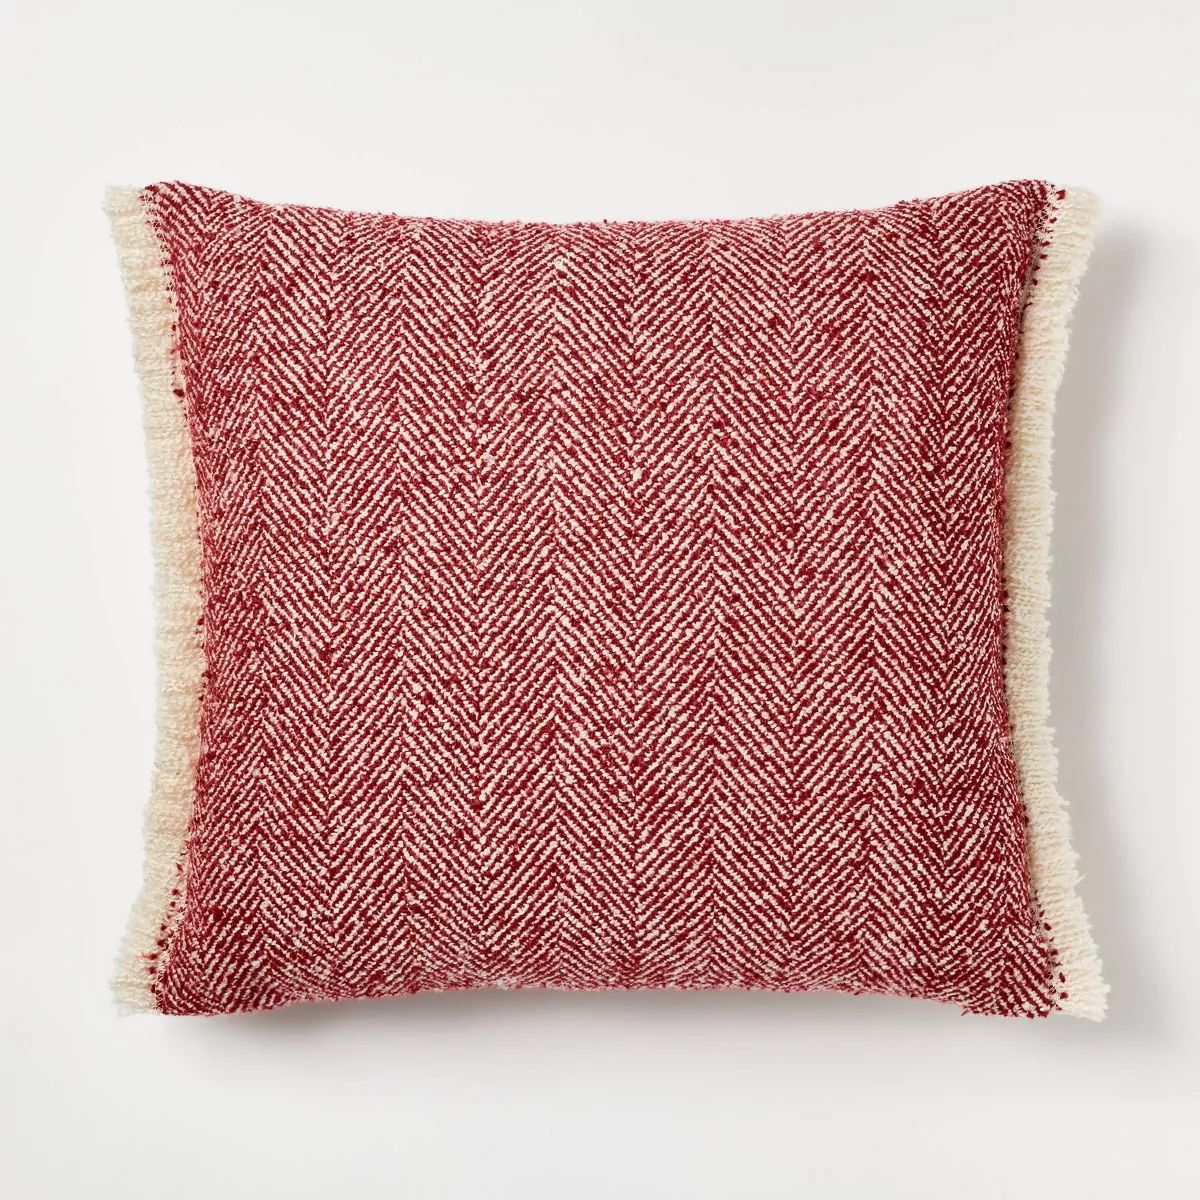 Herringbone with Frayed Edges Throw Pillow - Threshold™ designed with Studio McGee | Target